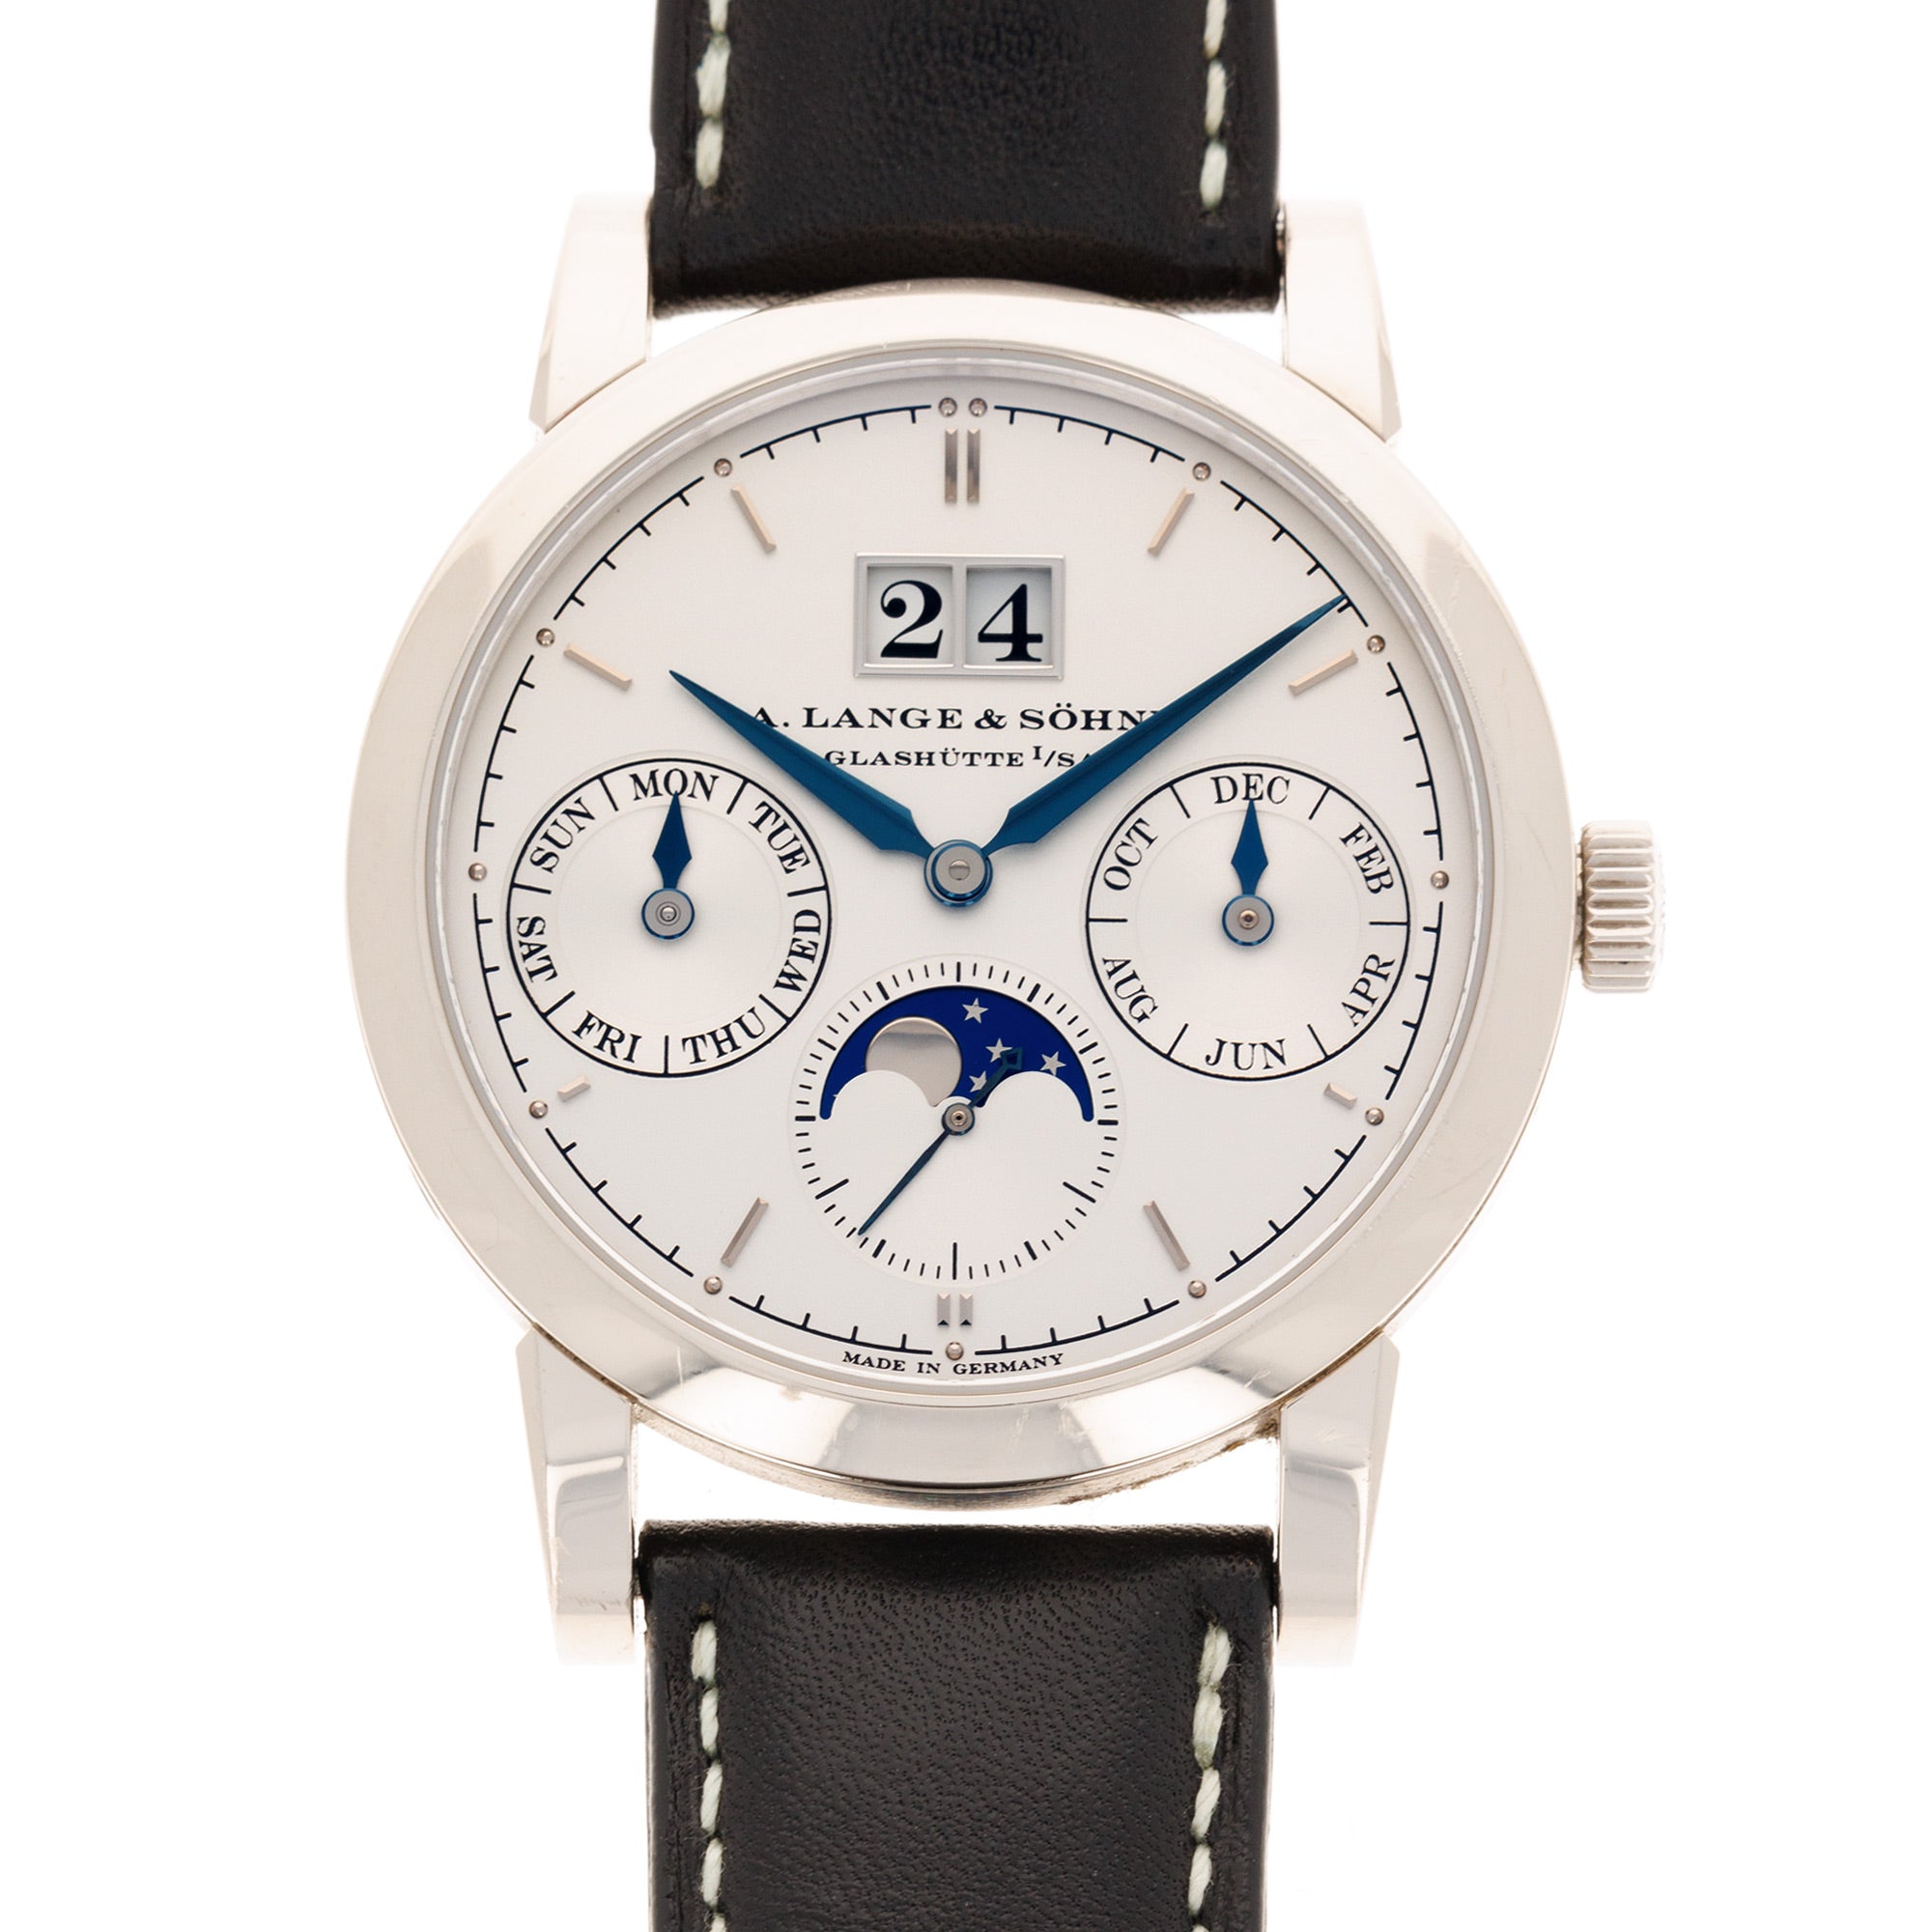 A. Lange &amp; Sohne - A. Lange &amp; Sohne White Gold Annual Calendar Watch Ref. 330.026 - The Keystone Watches